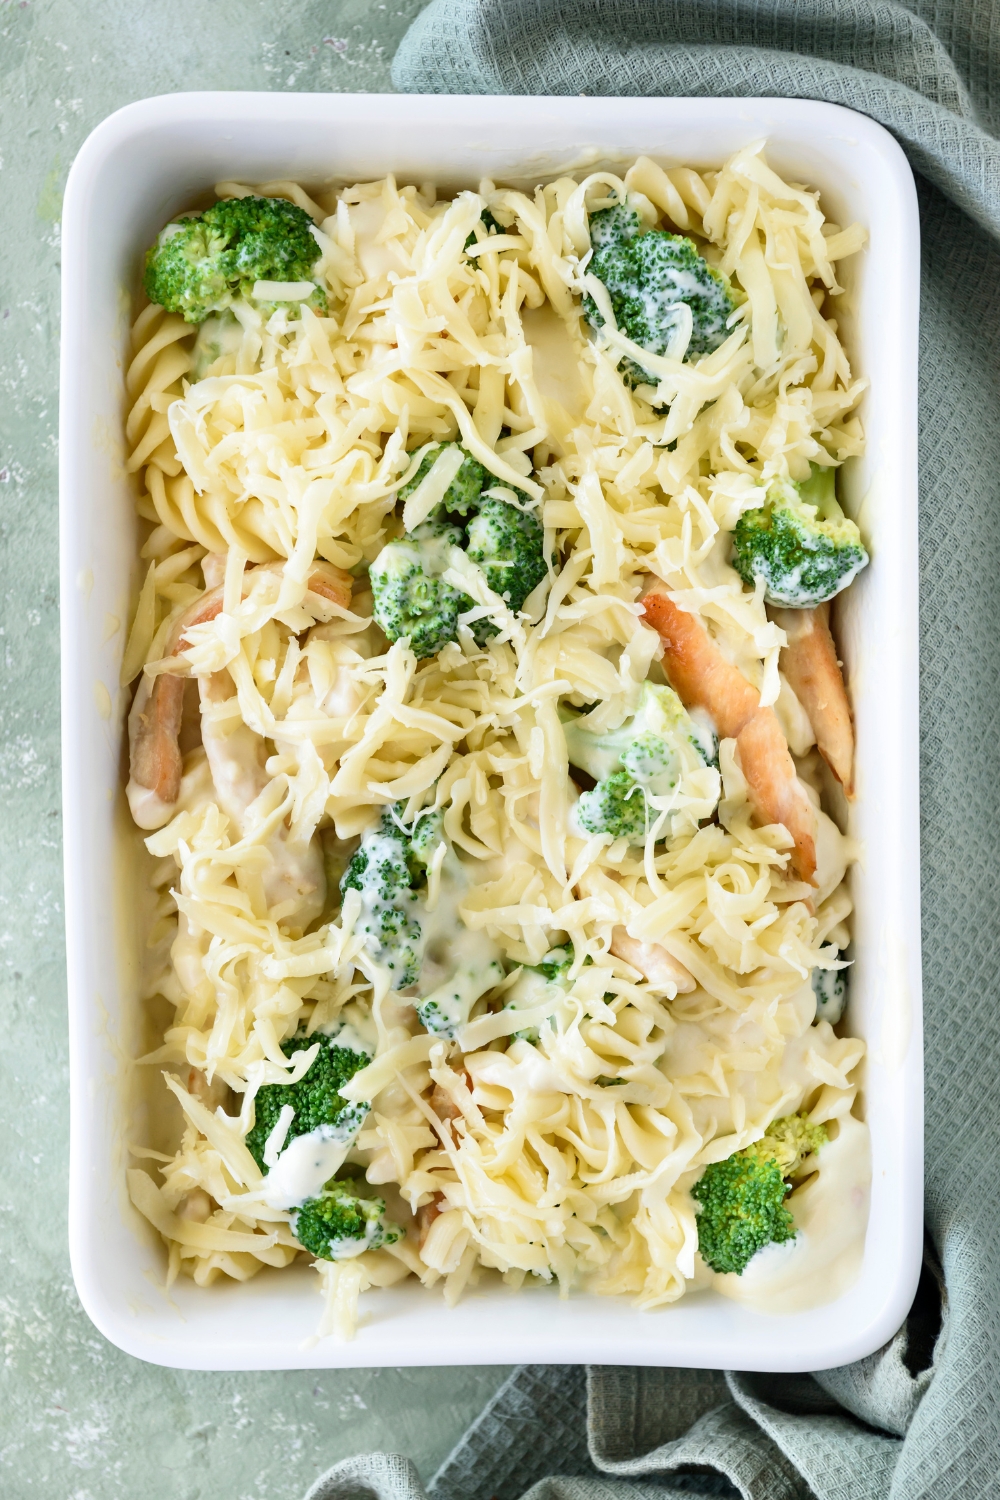 A baking dish filled with cooked pasta, broccoli, and chicken strips in a creamy sauce topped with shredded cheese.